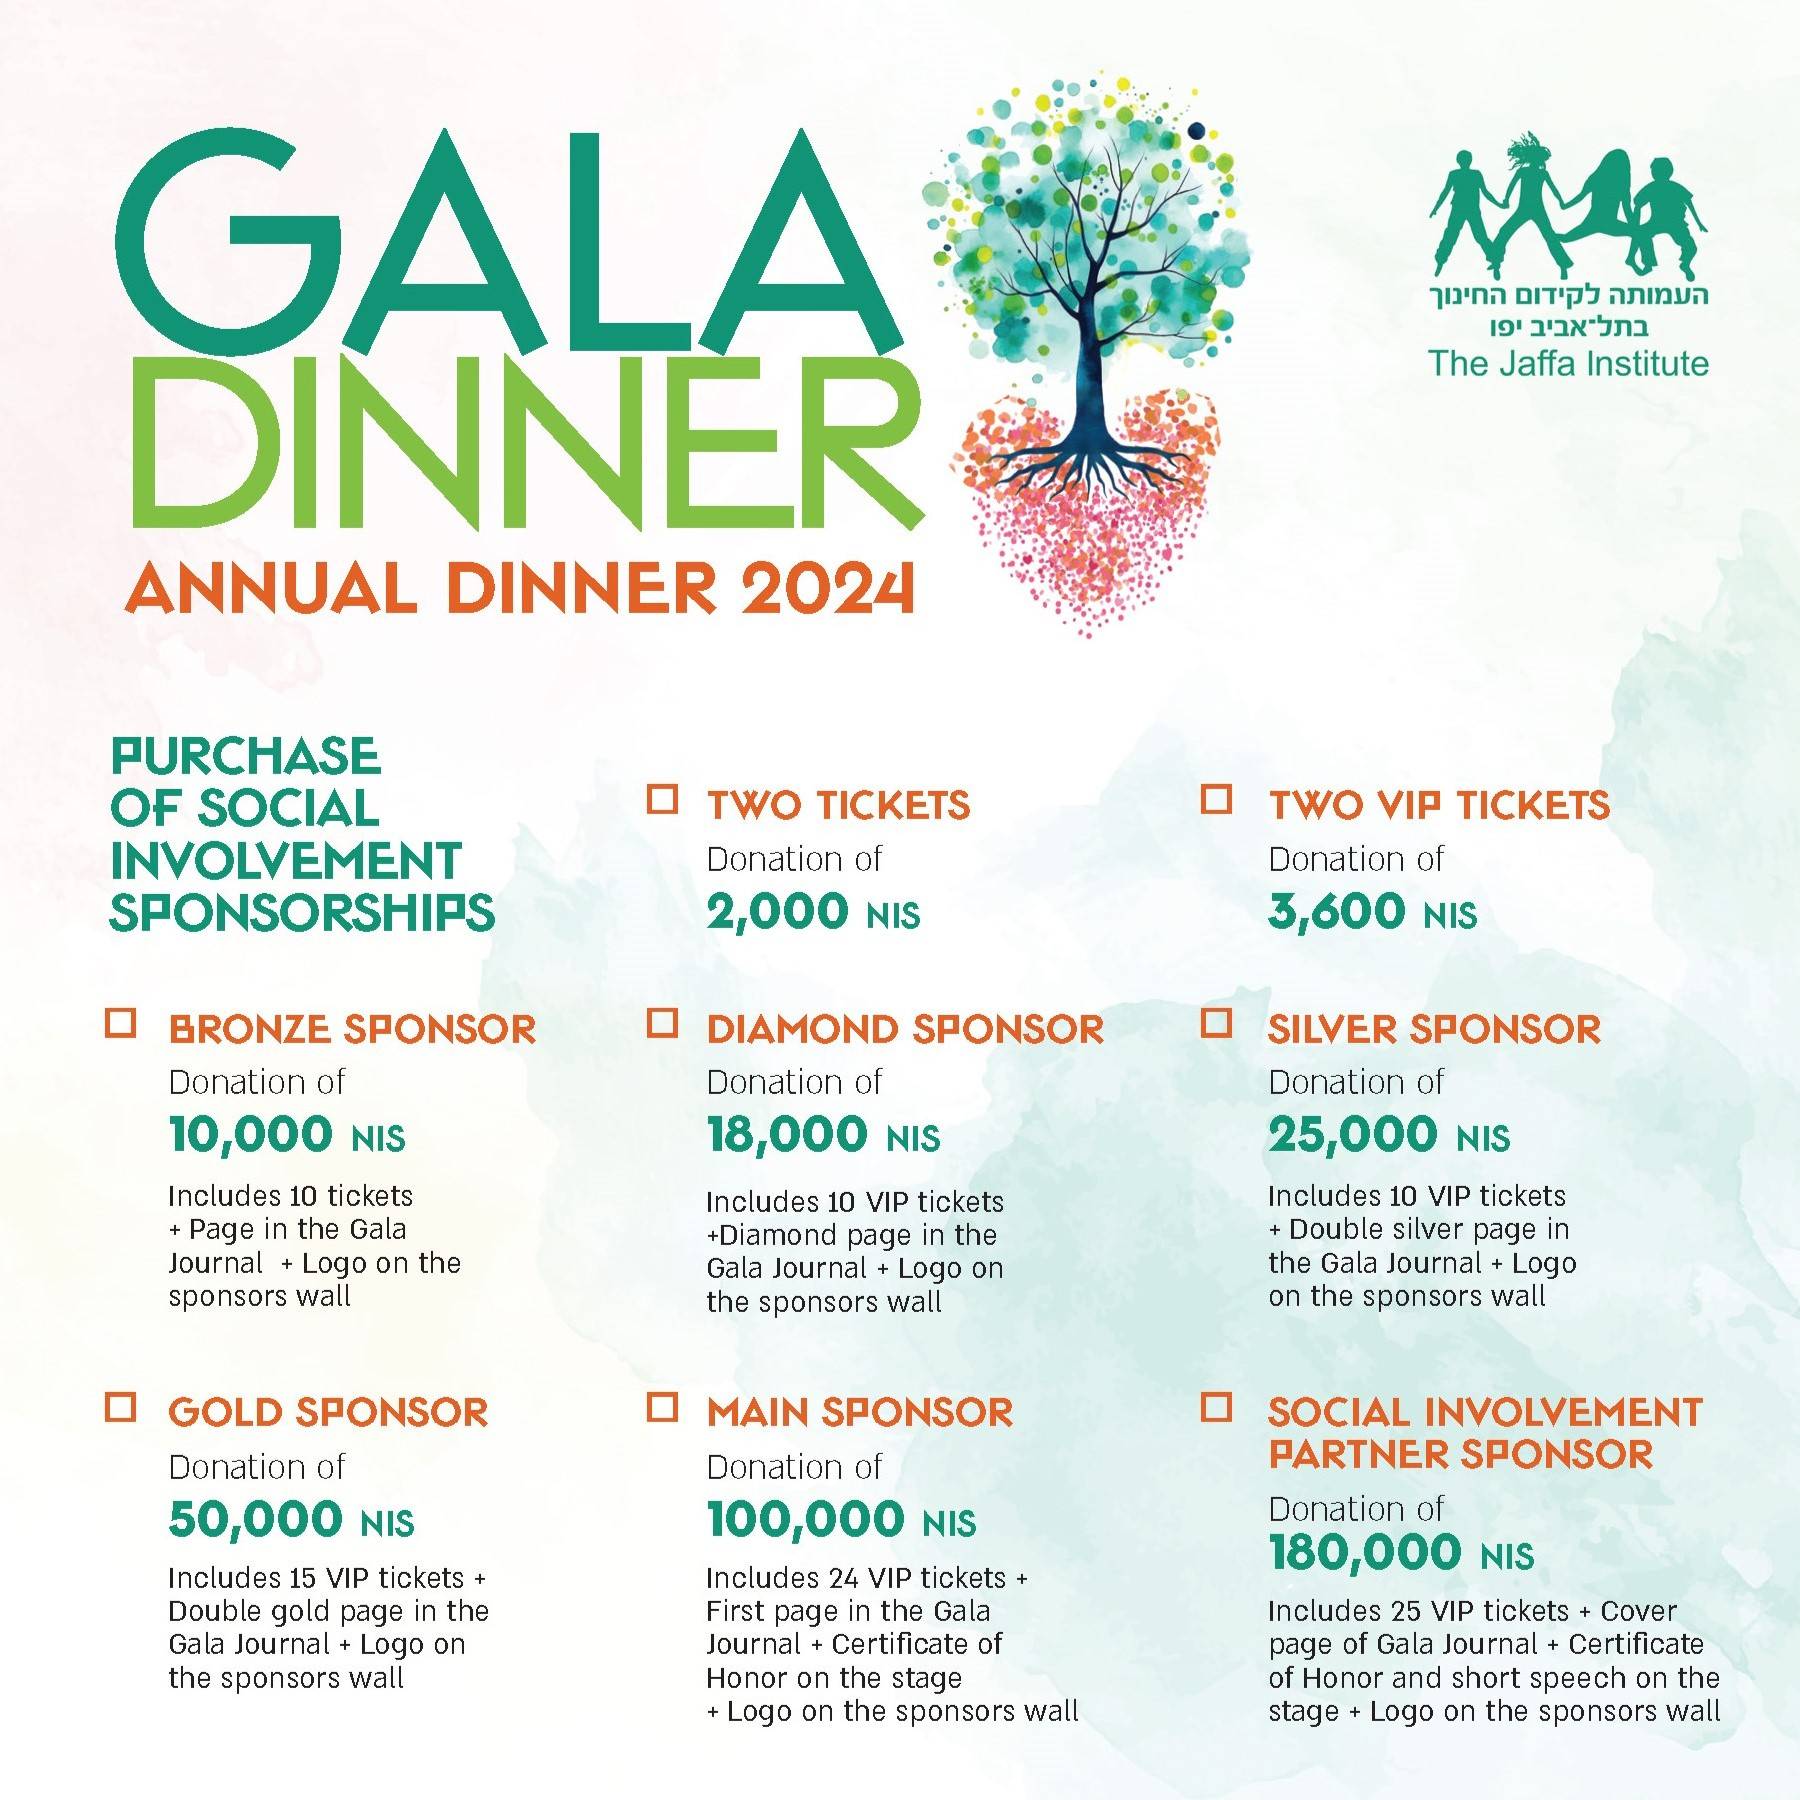 Purchase of social involvement sponsorships - Two tickets Donation of 2,000 NIS, Two VIP Tickets Donation of 3,600 NIS, Bronze sponsorship Donation of 10,000 NIS includes 10 tickets + Page in the Gala Journal and logo on the sponsors wall Diamond sponser Donation of 18,000 Includes 10 VIP Tickets + Diamond Page in the Gala Journal Logo on the Sponsors wall Silver Sponsor donation of 25,000 includes 10 VIP Tickets + Double silver page in the Gala Journal and Logo on the sponsors wall Gold Sponsor Donation of 50,000 NIS includes 15 VIP Tickets + Double gold page in the Gala Journal and Logo on the sponsors wall Main Sponsor Donation of 100,000 BUS includes 24 VIP Tickets + First page in the Gala Journal + Certificate of Honor on the stage + Logo on the sponsers wall Social Involvement Partner Sponsor Donation of 180,000 includes 25 VIP tickets + Cover Page of Gala Journal + Certificate of Honor and short speech on the stage + Logo on the sponsors wall